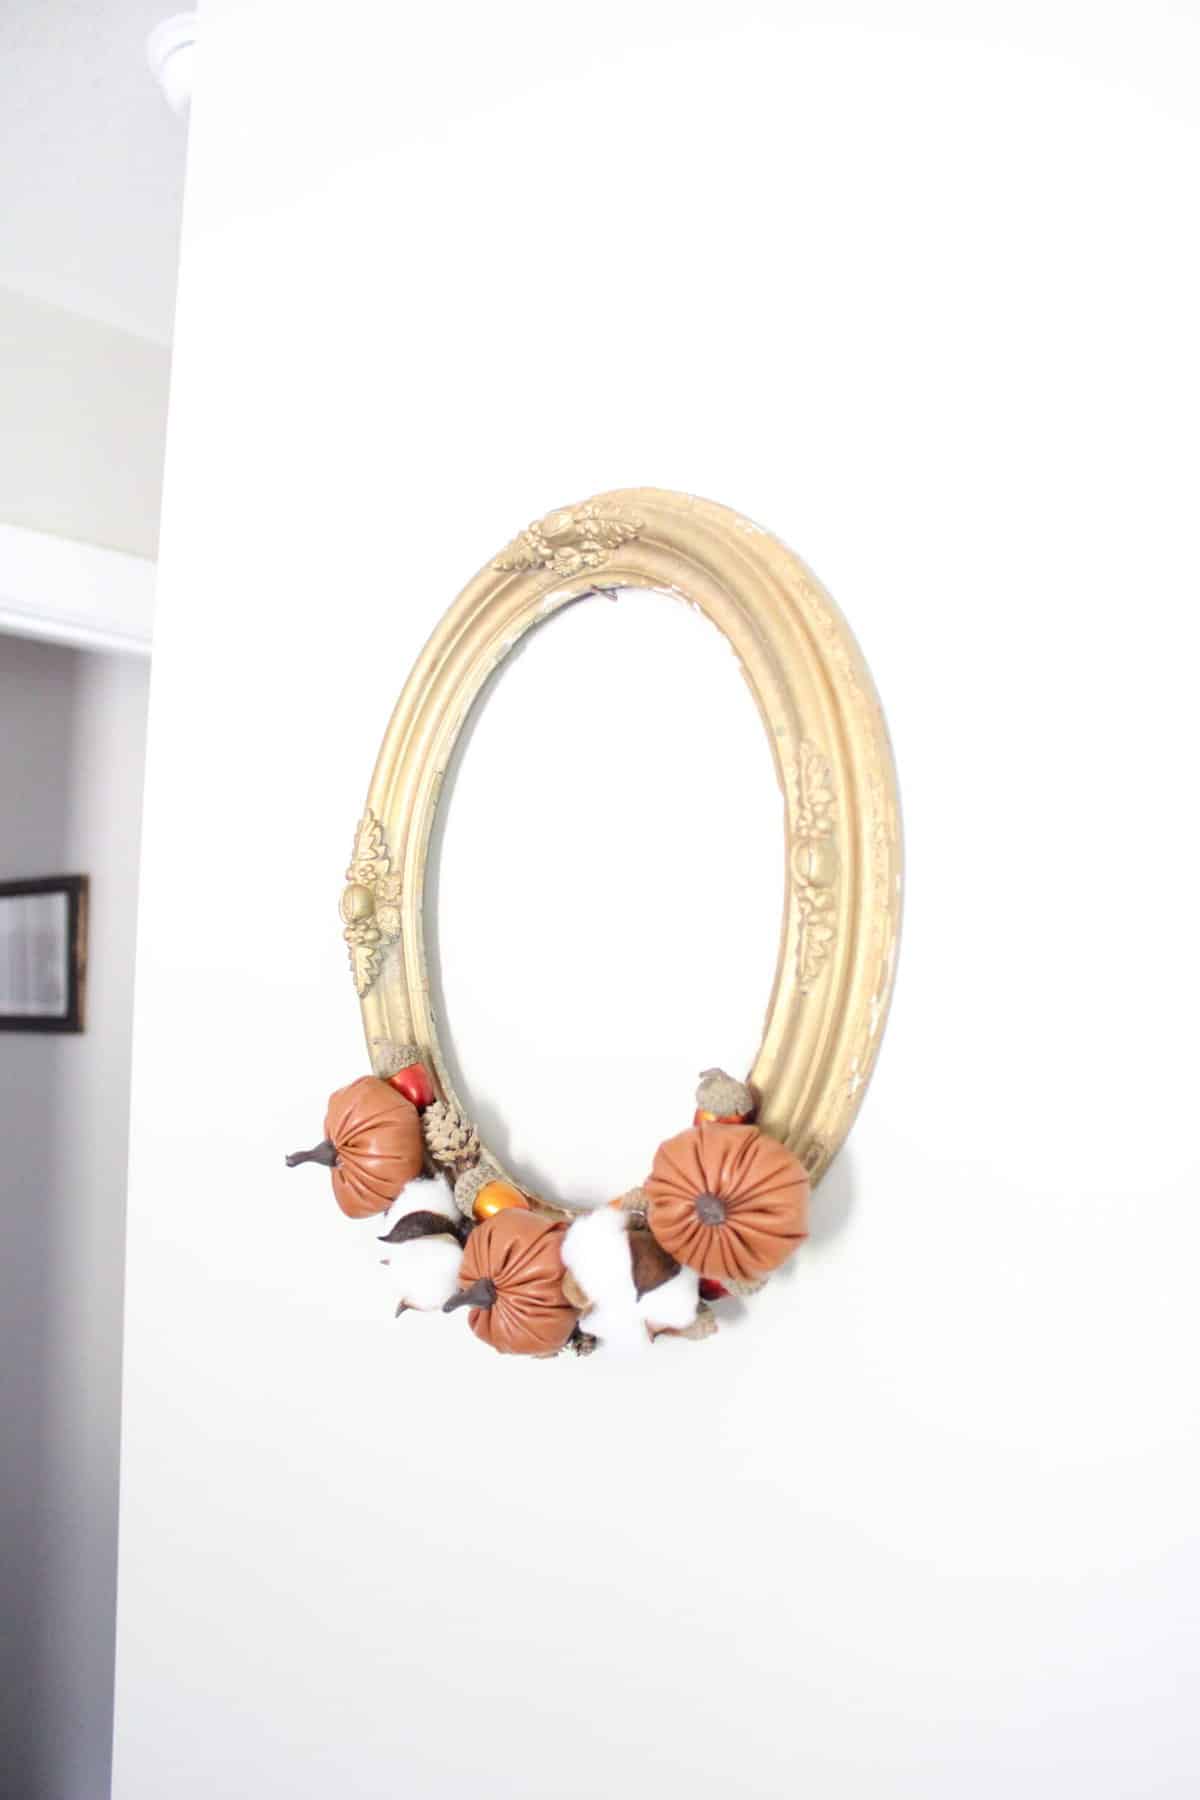 Finished Fall Antique Frame Wreath